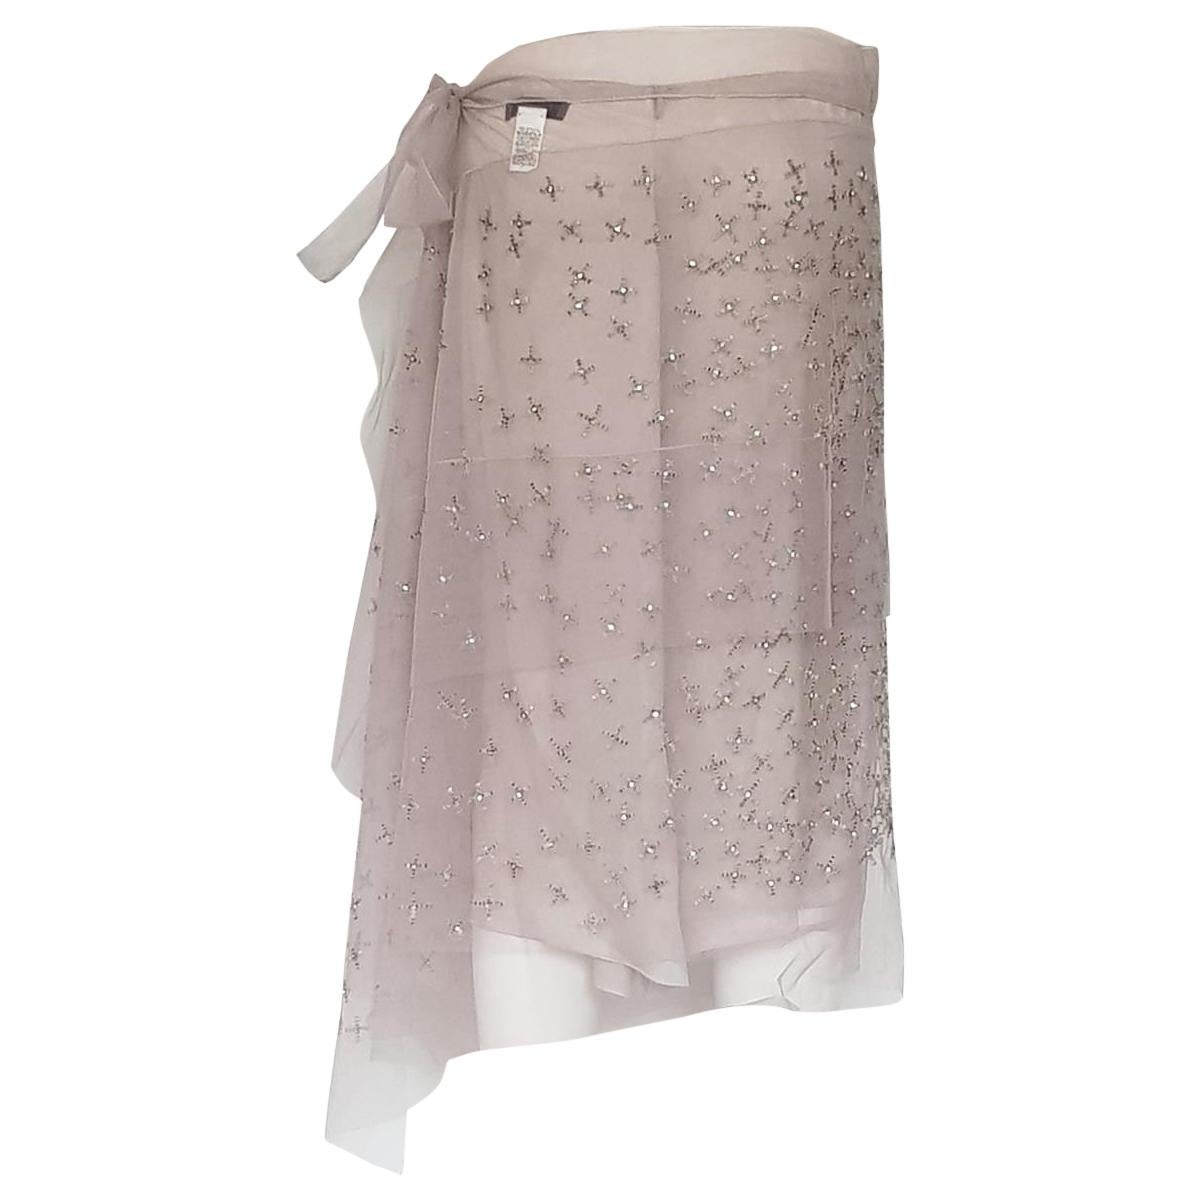 Super chic skirt by Alberta Ferretti
Voile
Antique rose color
With rhinestones
Pareo total width cm 108 (42.5 inches)
Silk petticoat
Grey color
Total length cm 68 (26.8 inches)
Waist cm 38 (14.9 inches)
Worldwide express shipping included in the